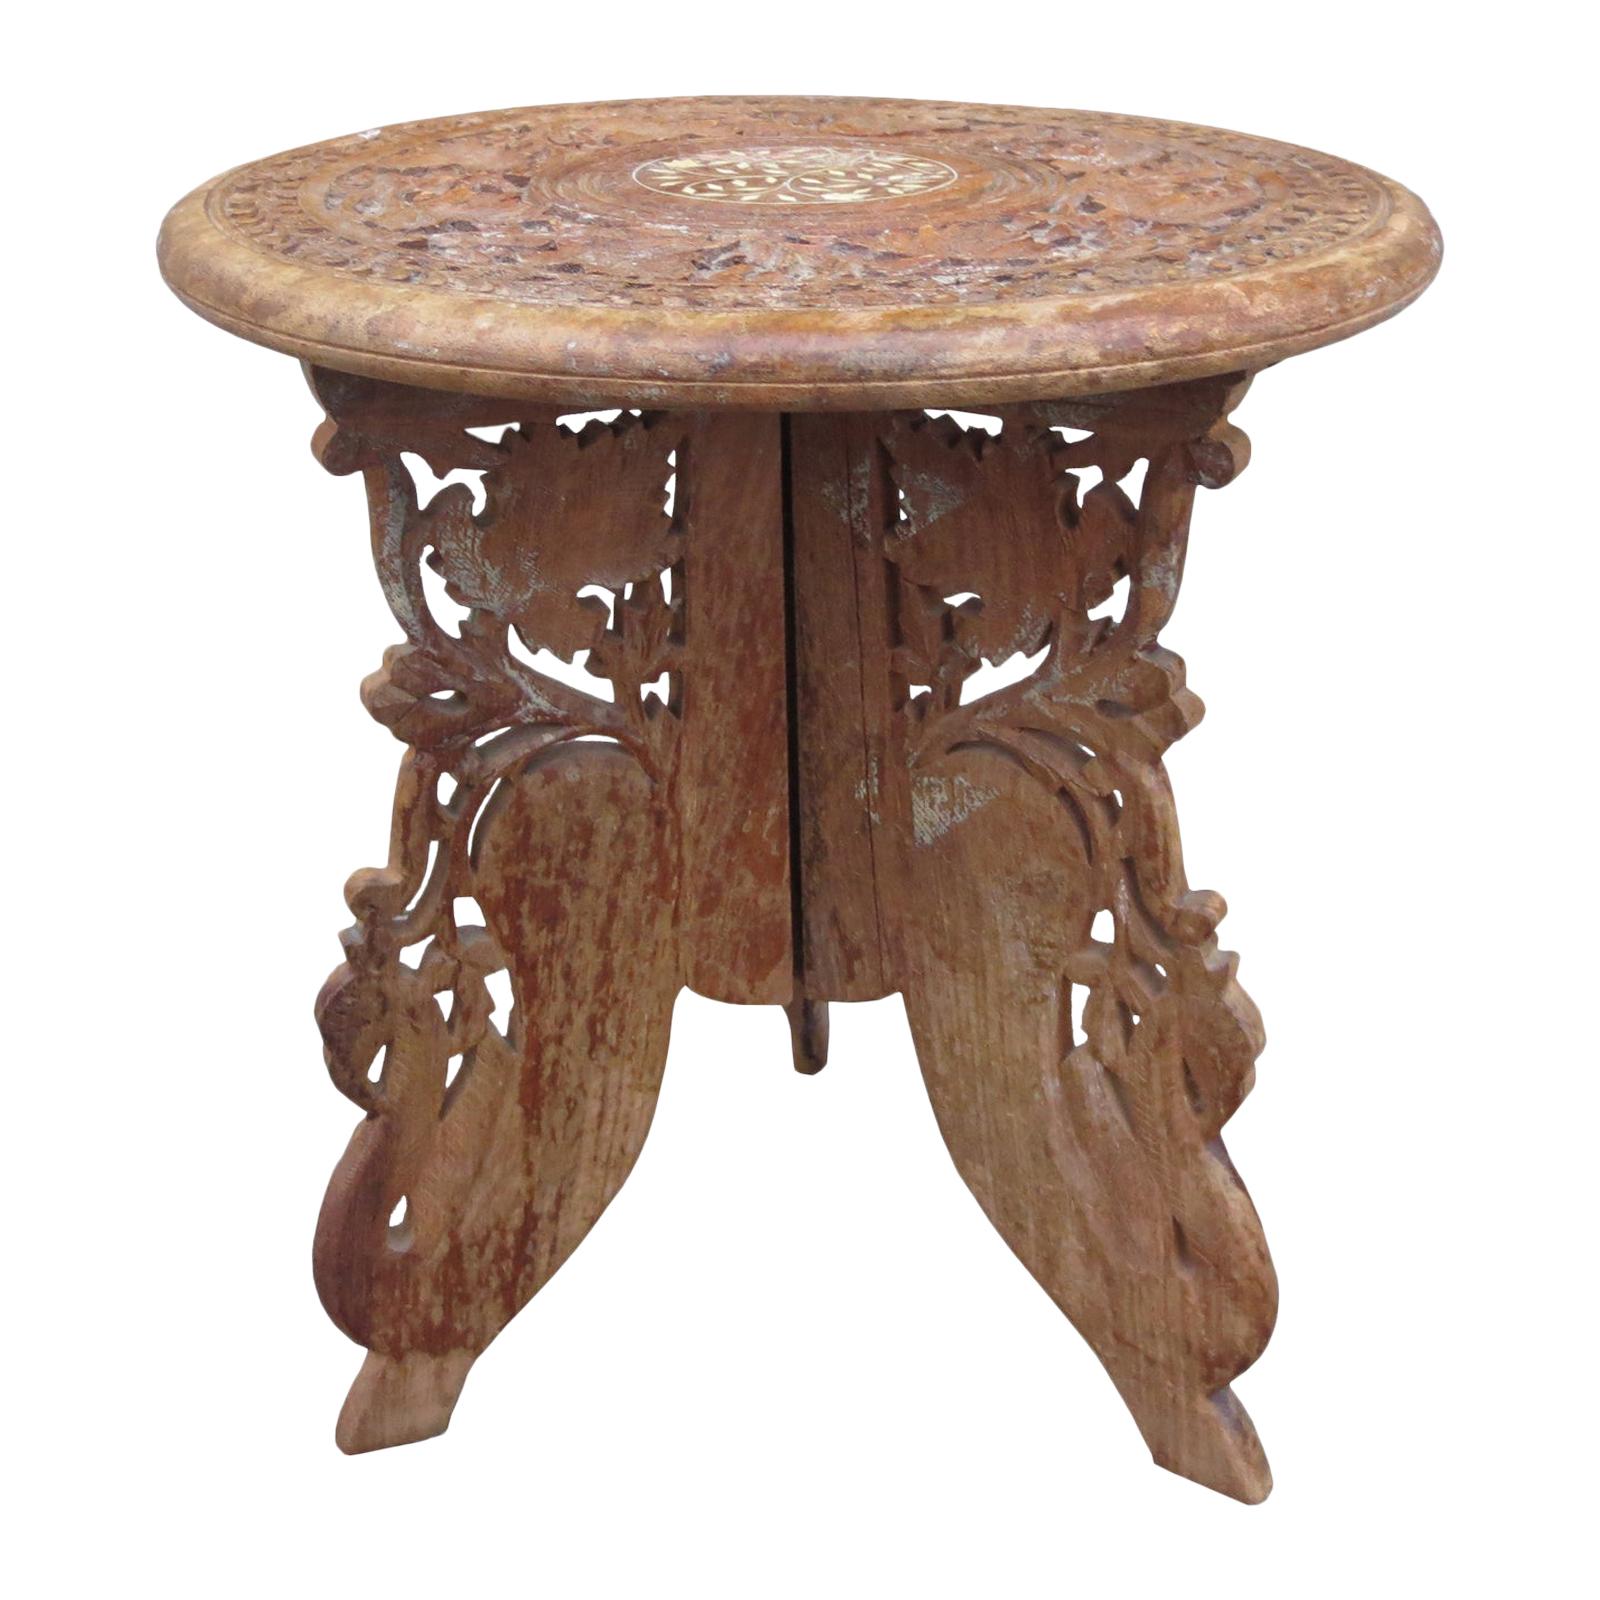 20th Century Carved Wooden Drinks Table with Inlay